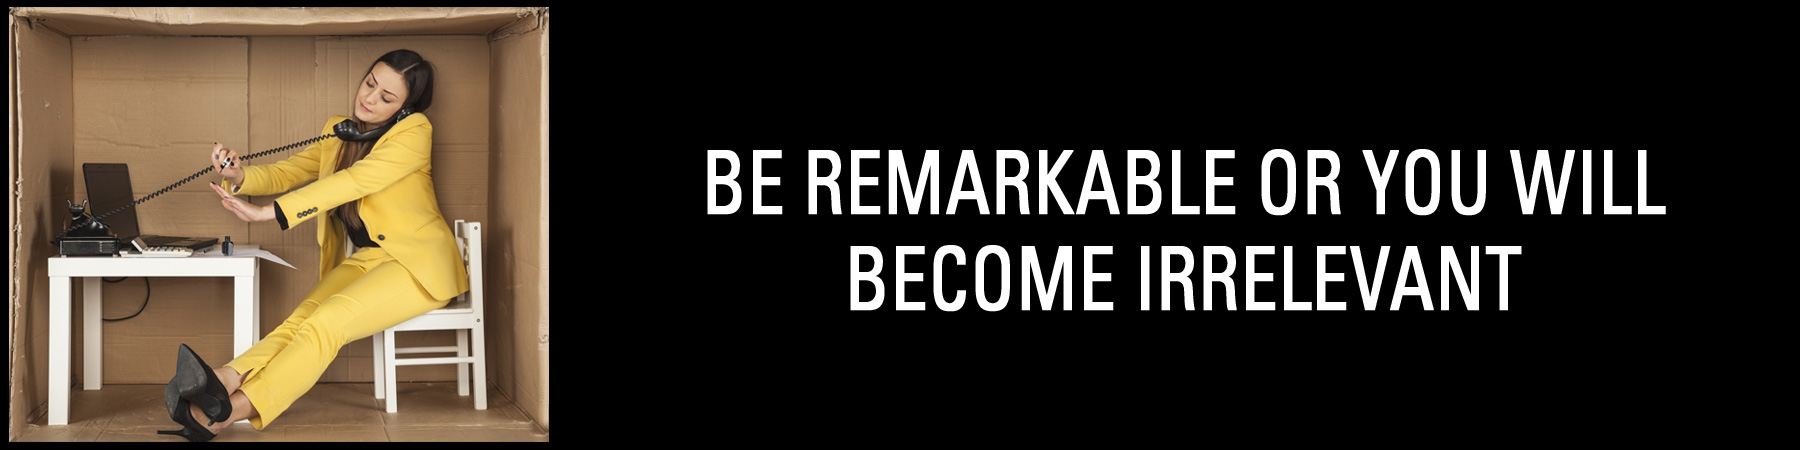 BE REMARKABLE OR YOU WILL BECOME IRRELEVANT